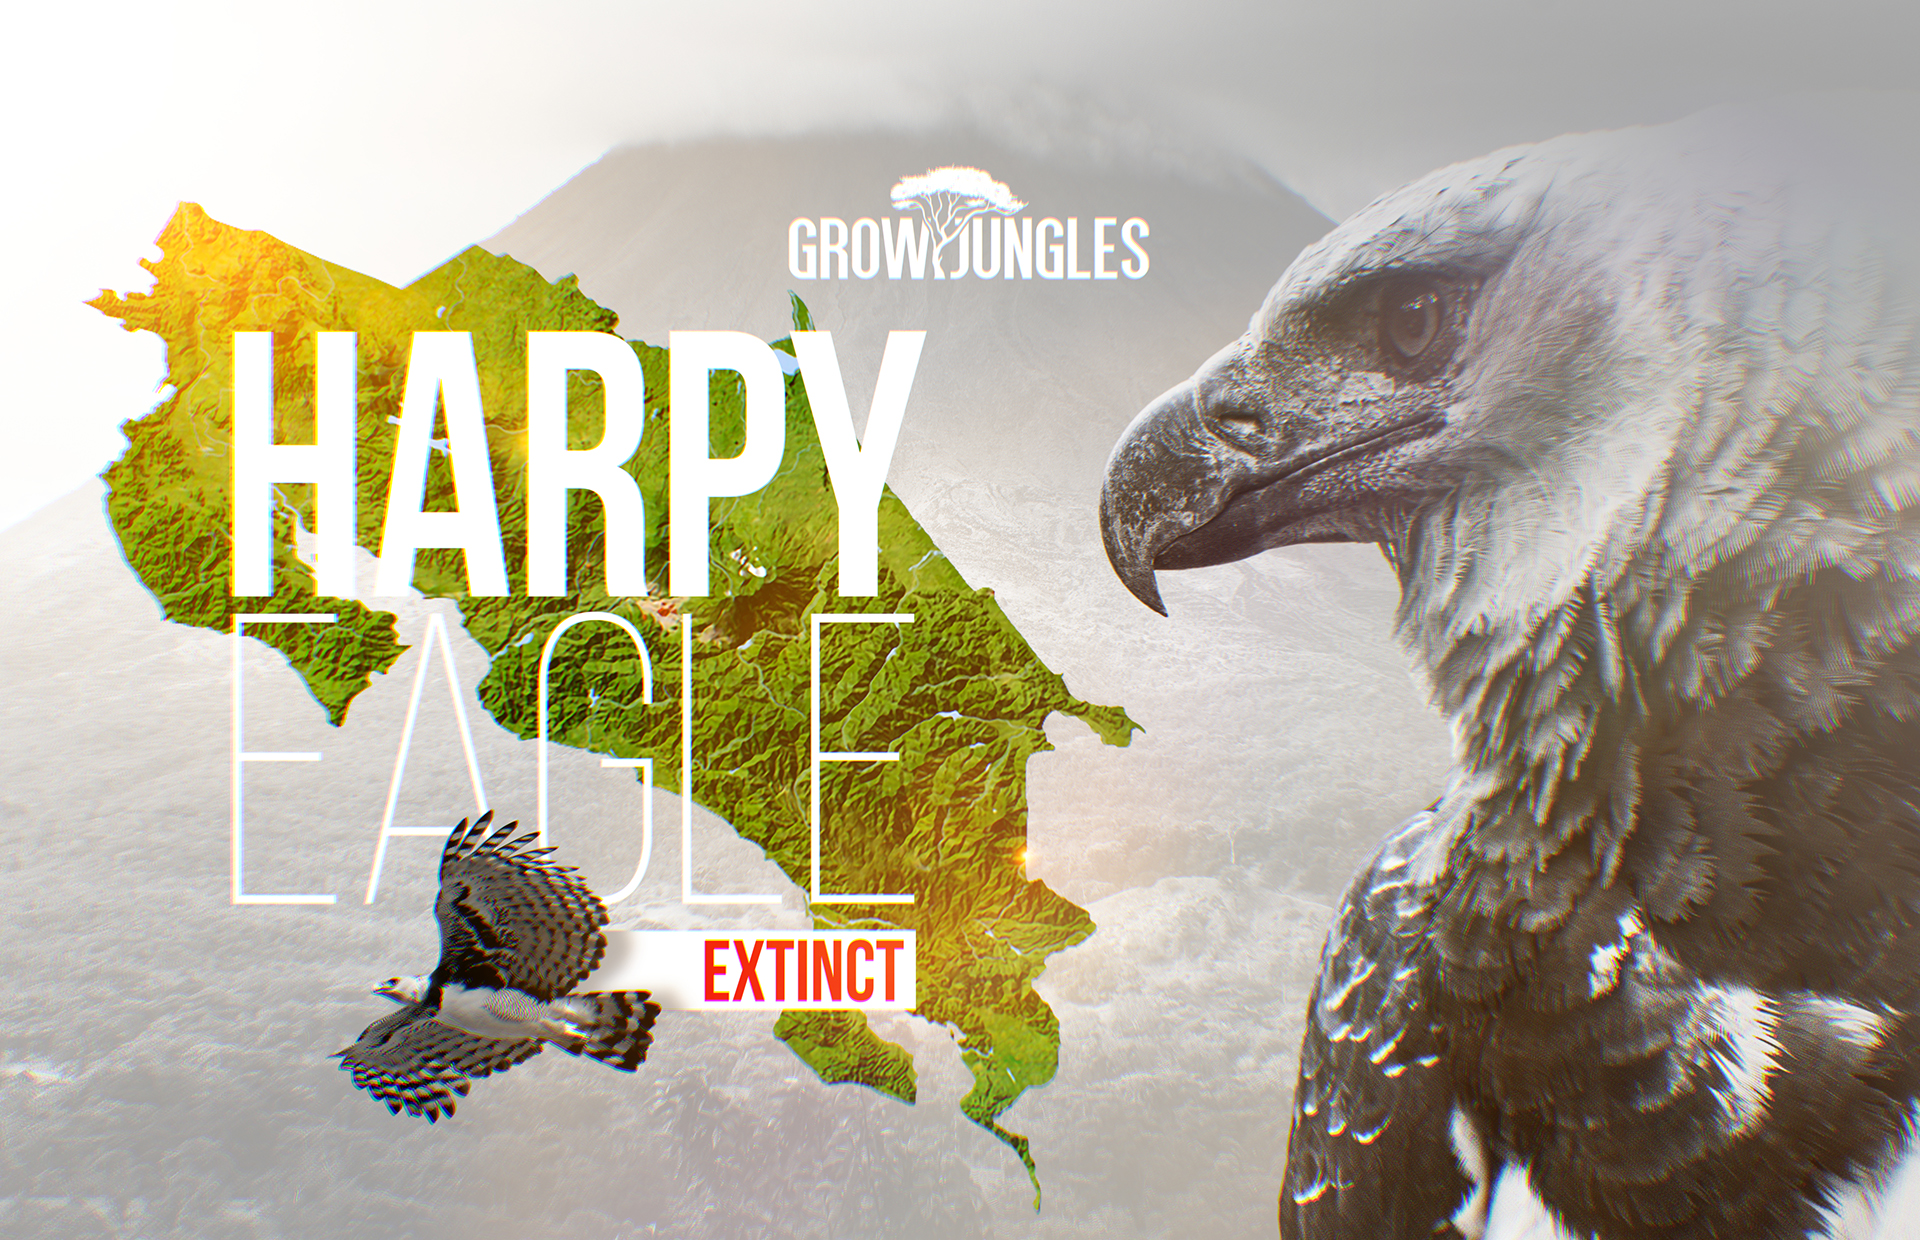 The Extinction of the Harpy Eagle (Harpia harpyia) in Costa Rica